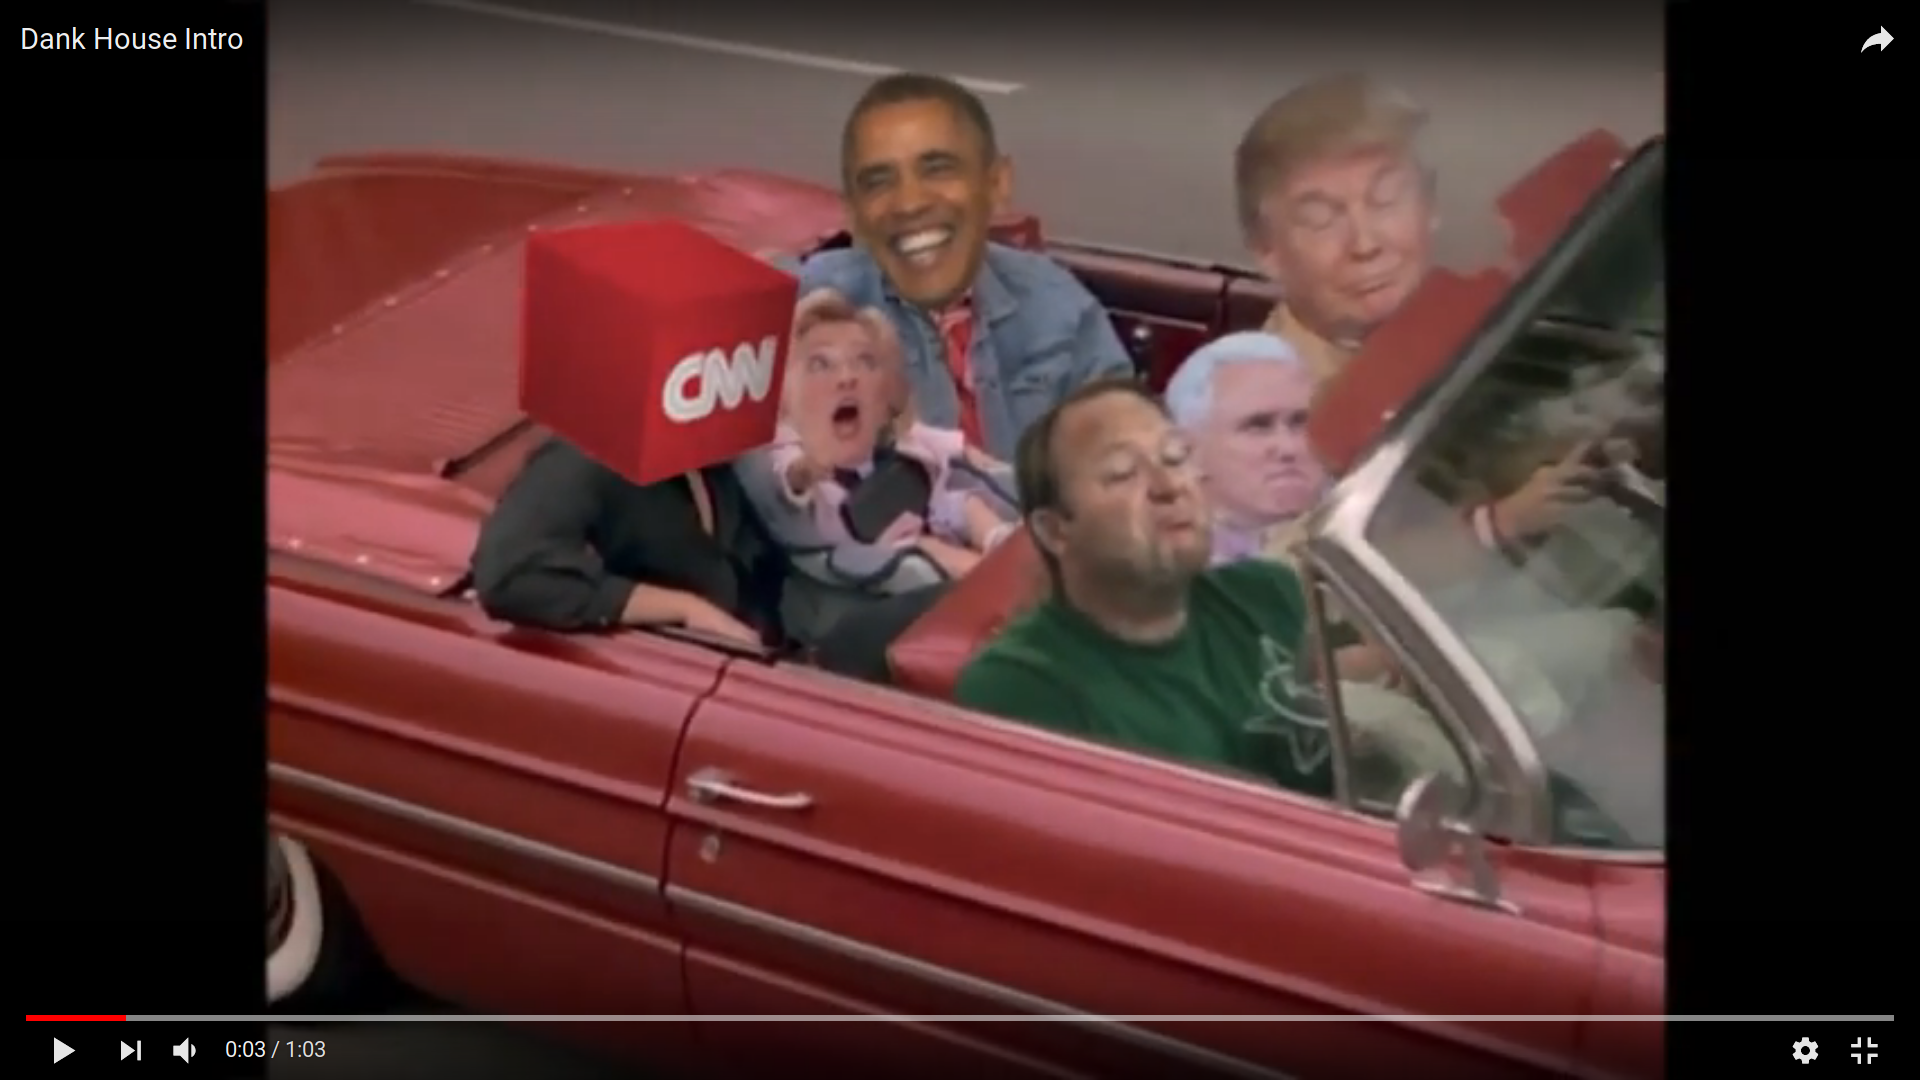 FULL HOUSE CNN OBAMA HILLARY IN BACK and TRUMP PENCE ALEXJONES IN FRONT of the red car.png